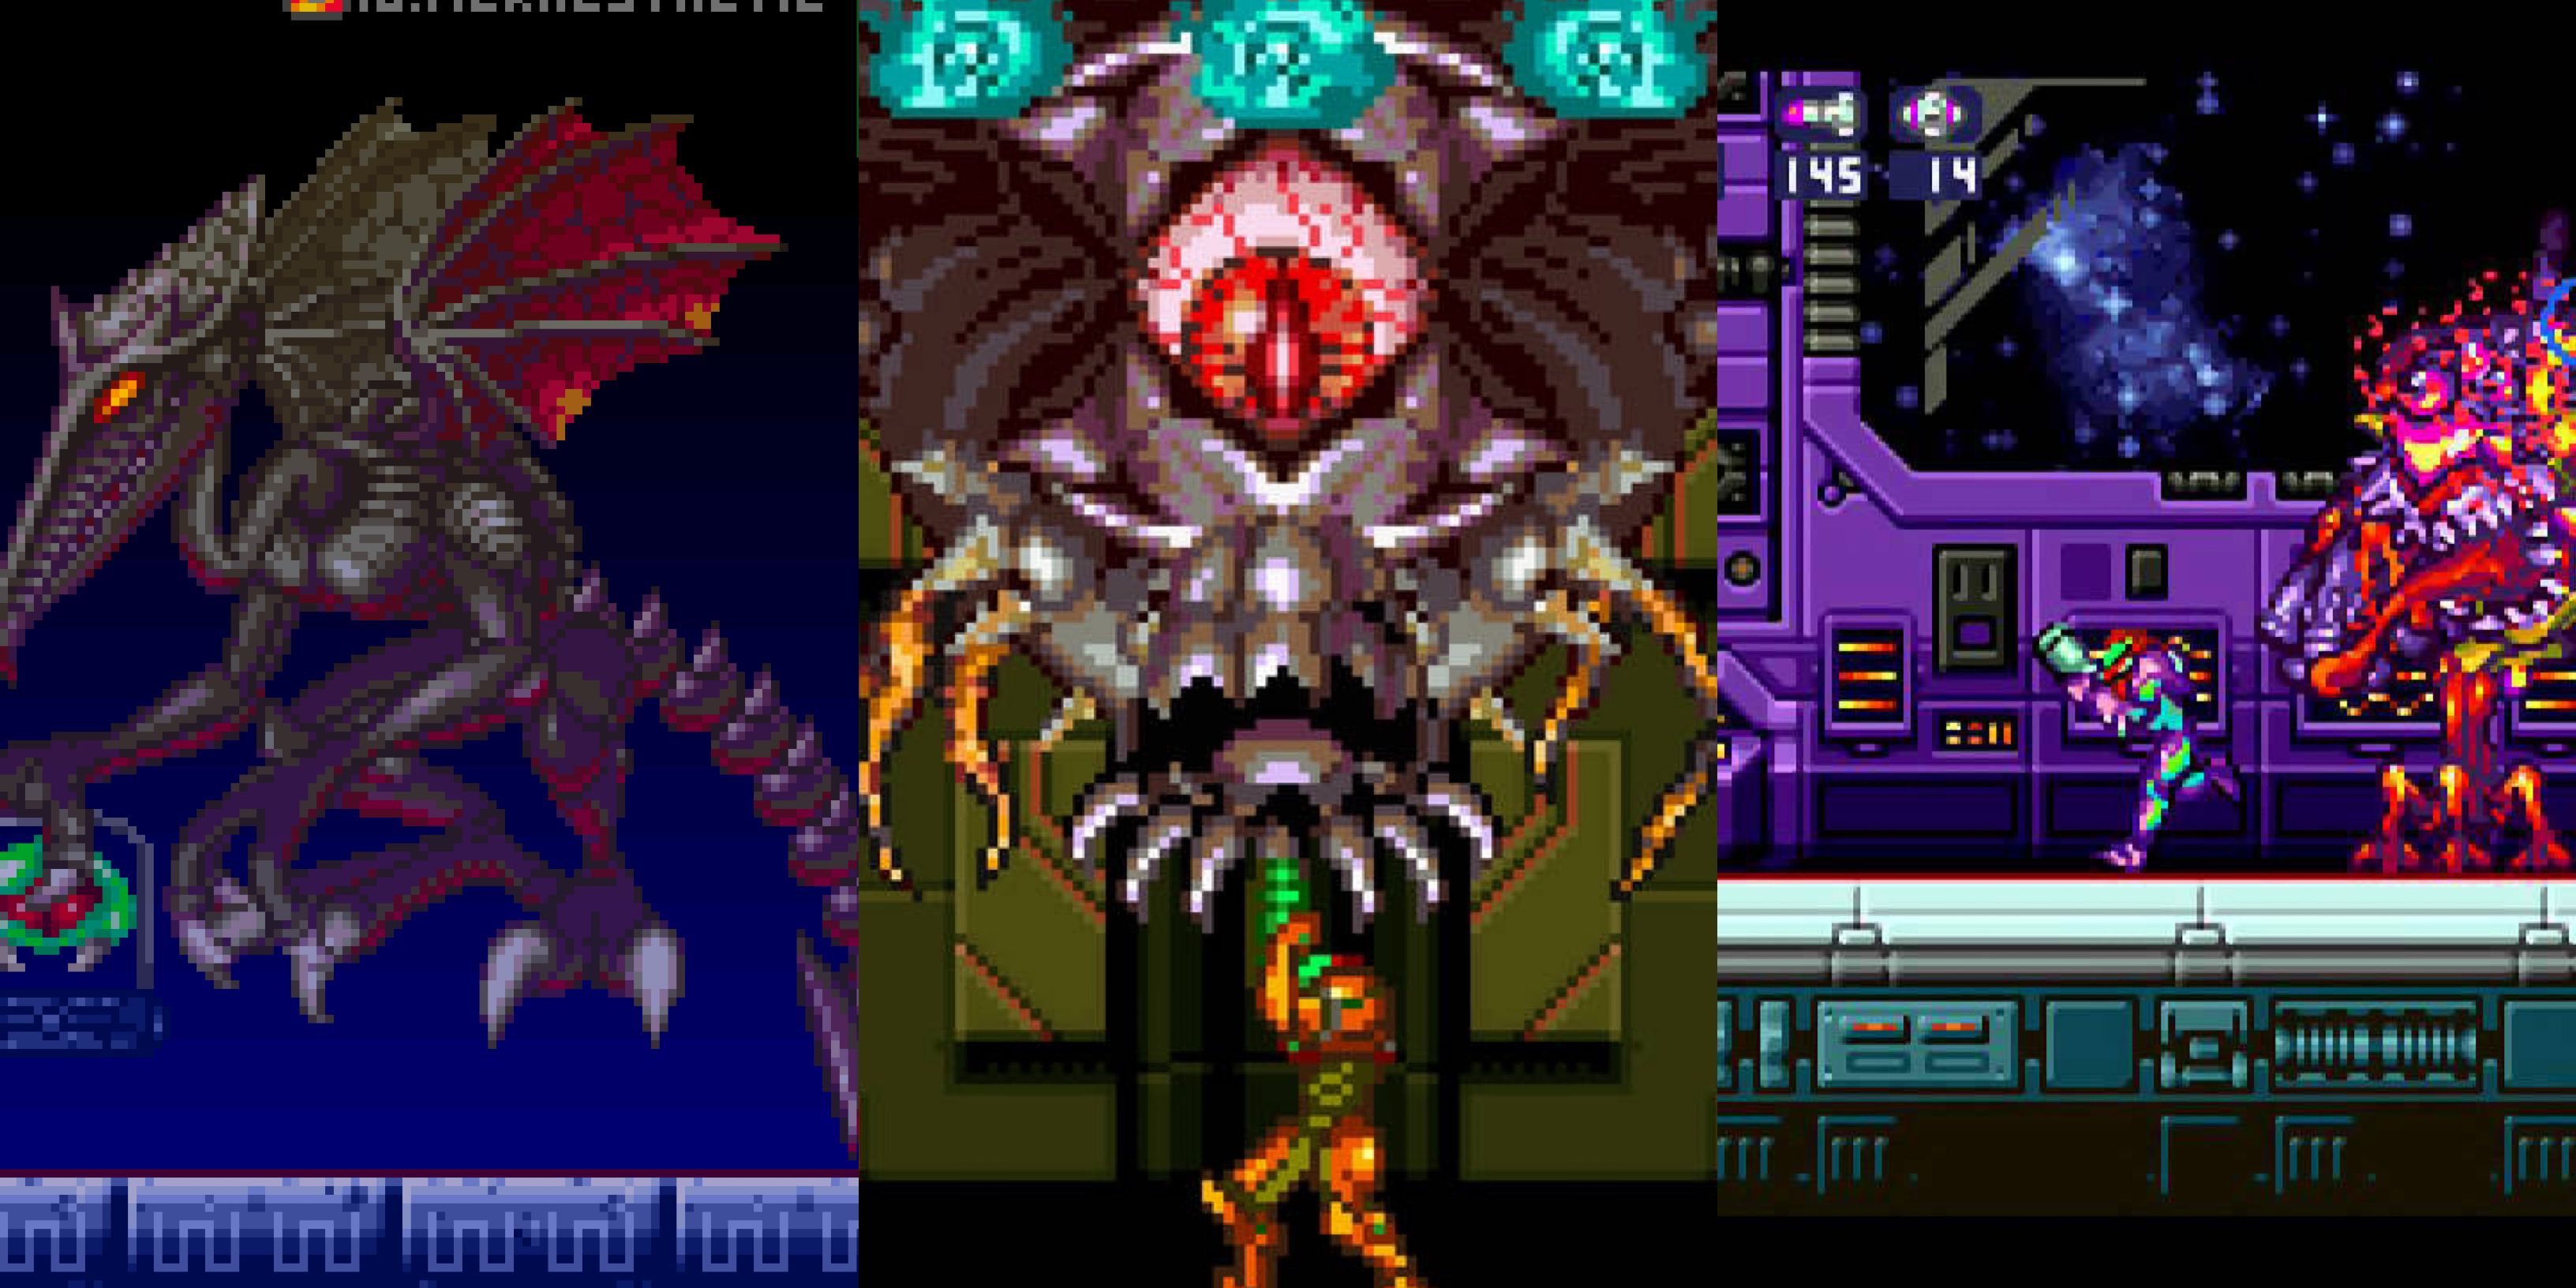 Difficult Metroid boss fights: Ridley in Super Metroid (left), Phantoon in Super Metroid (middle), and SA-X in Metroid Fusion (right)